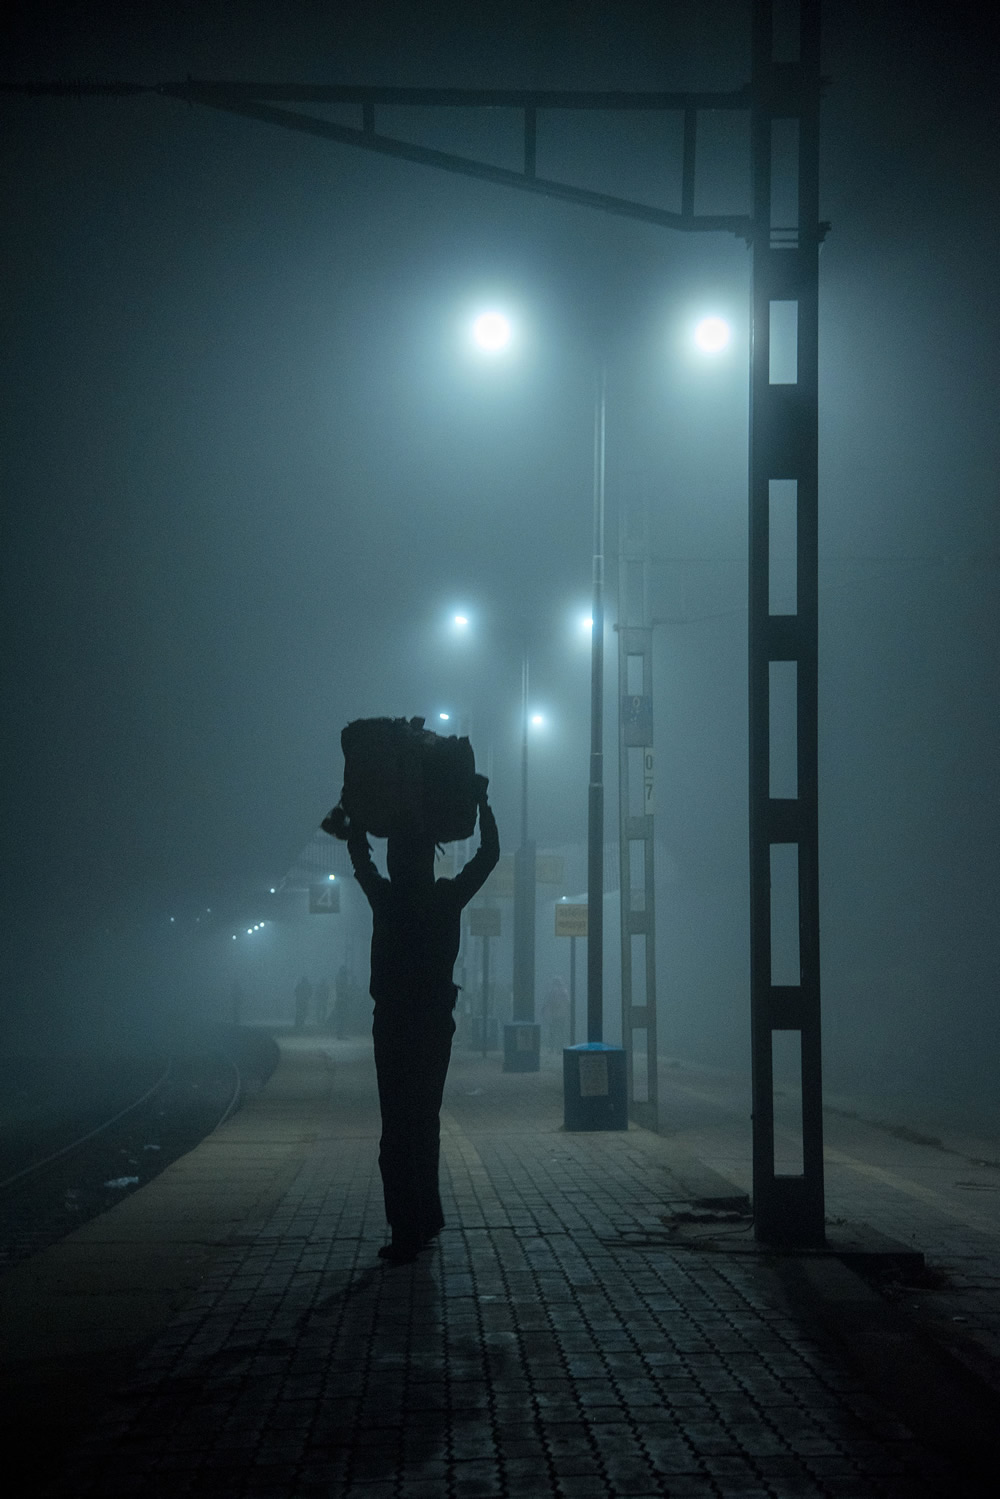 The Last Train: Photo Series By Tuhin Biswas